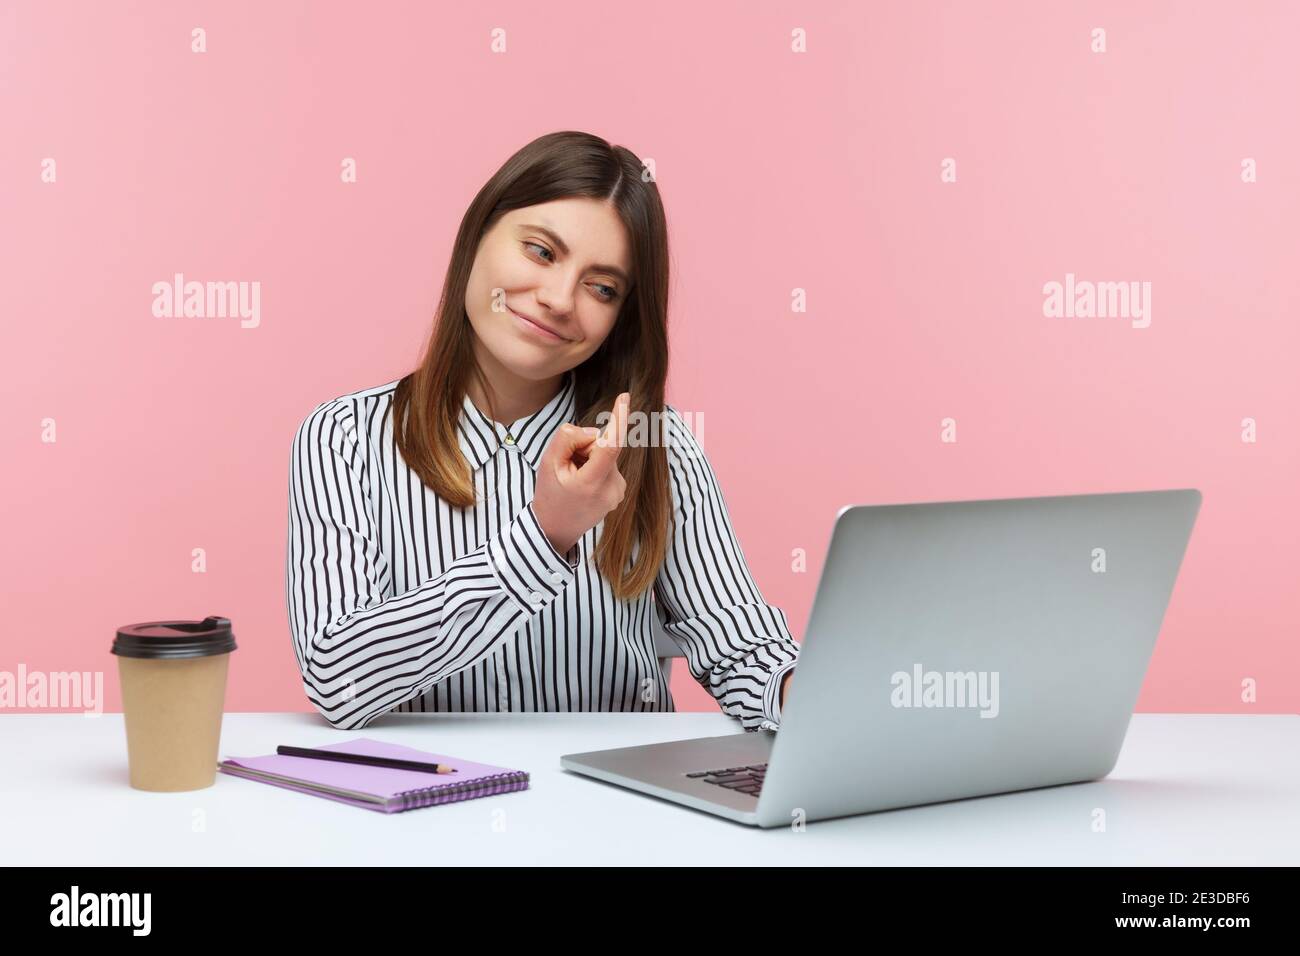 Come here! Positive beautiful woman making beckoning gesture with finger talking on video call using laptop, having online romantic communication. Ind Stock Photo